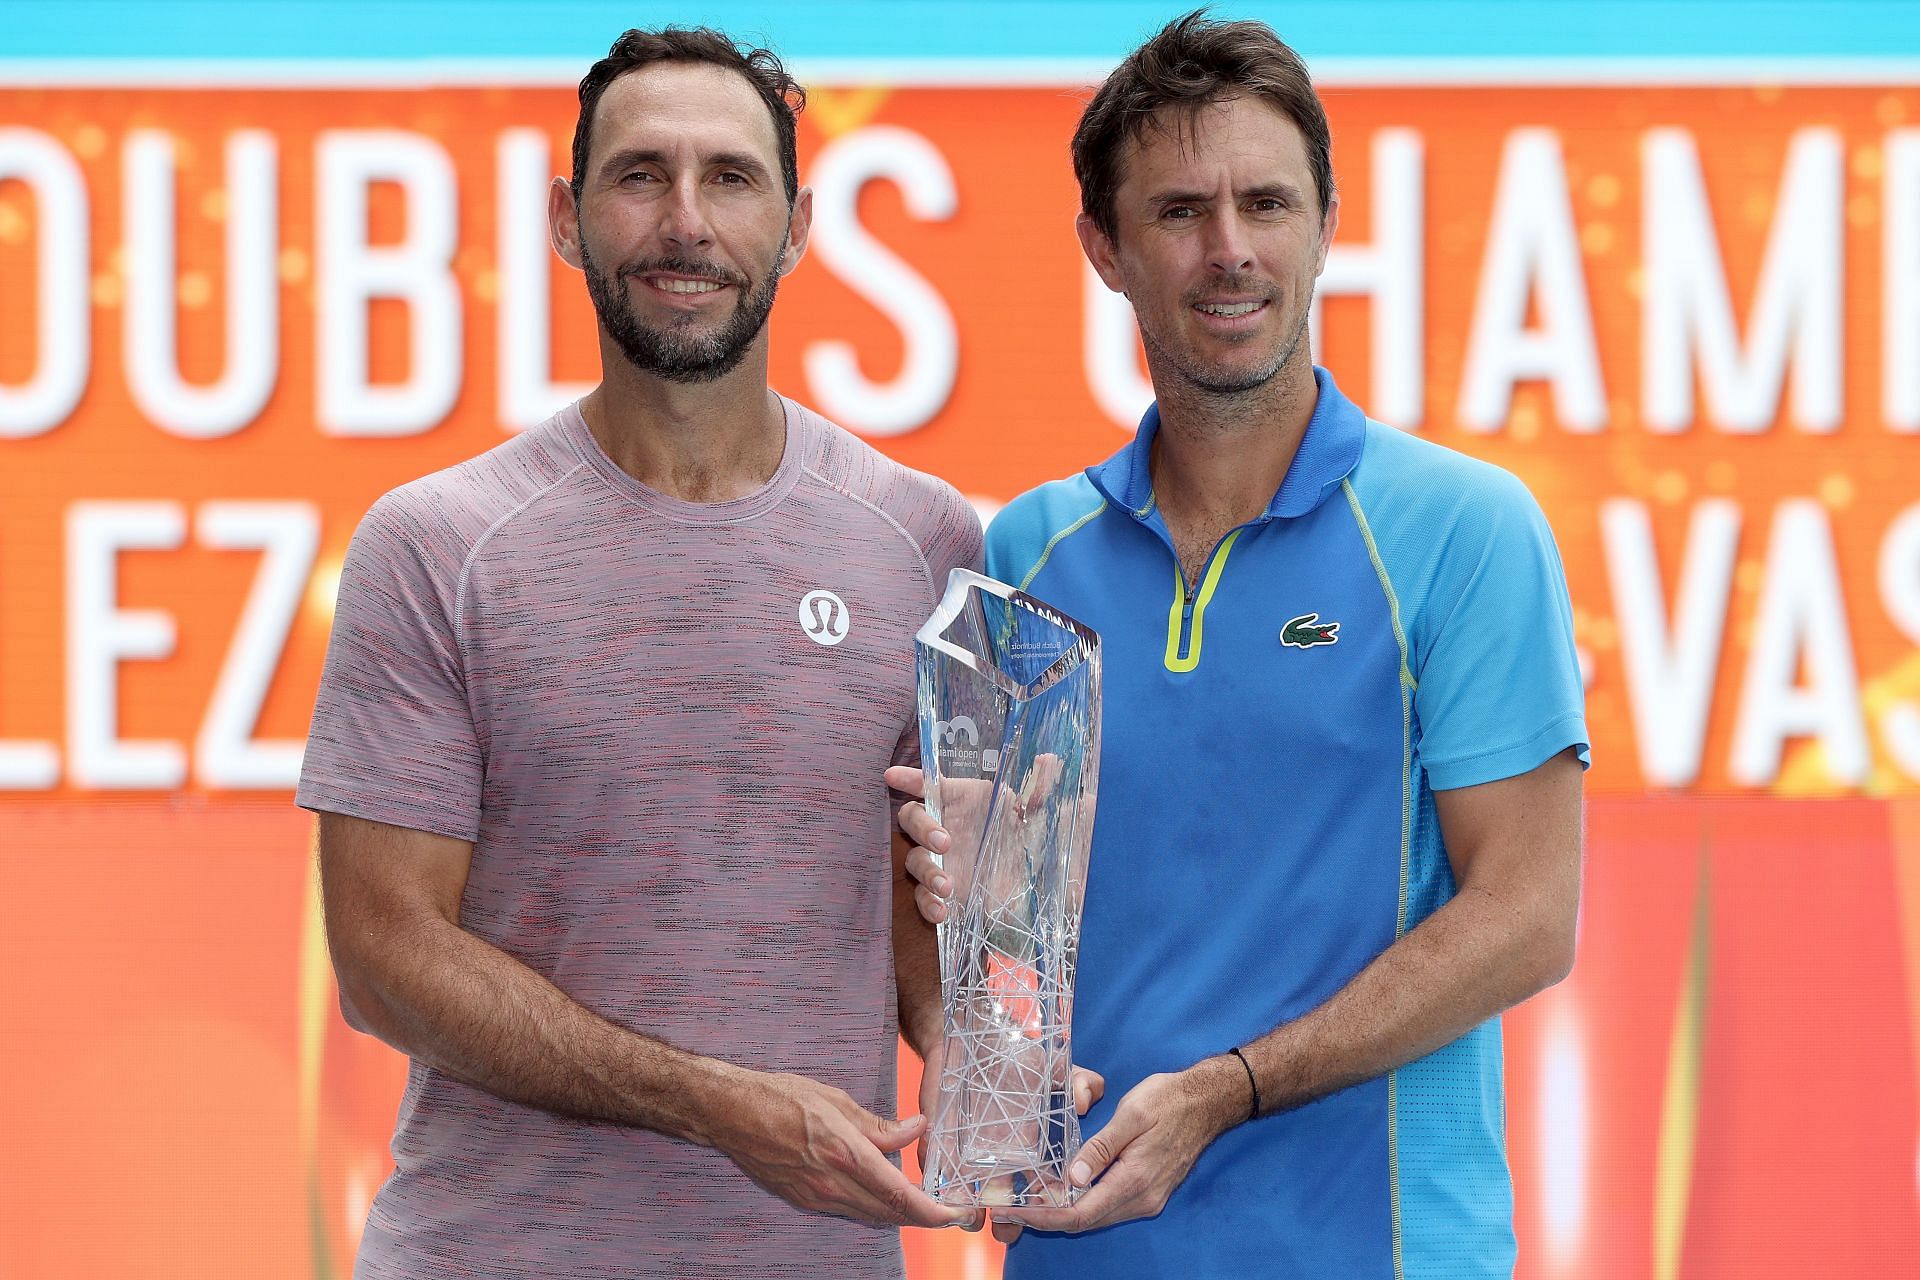 Santiago Gonzalez and Edouard Roger-Vasselin with the 2023 Miami Open doubles title